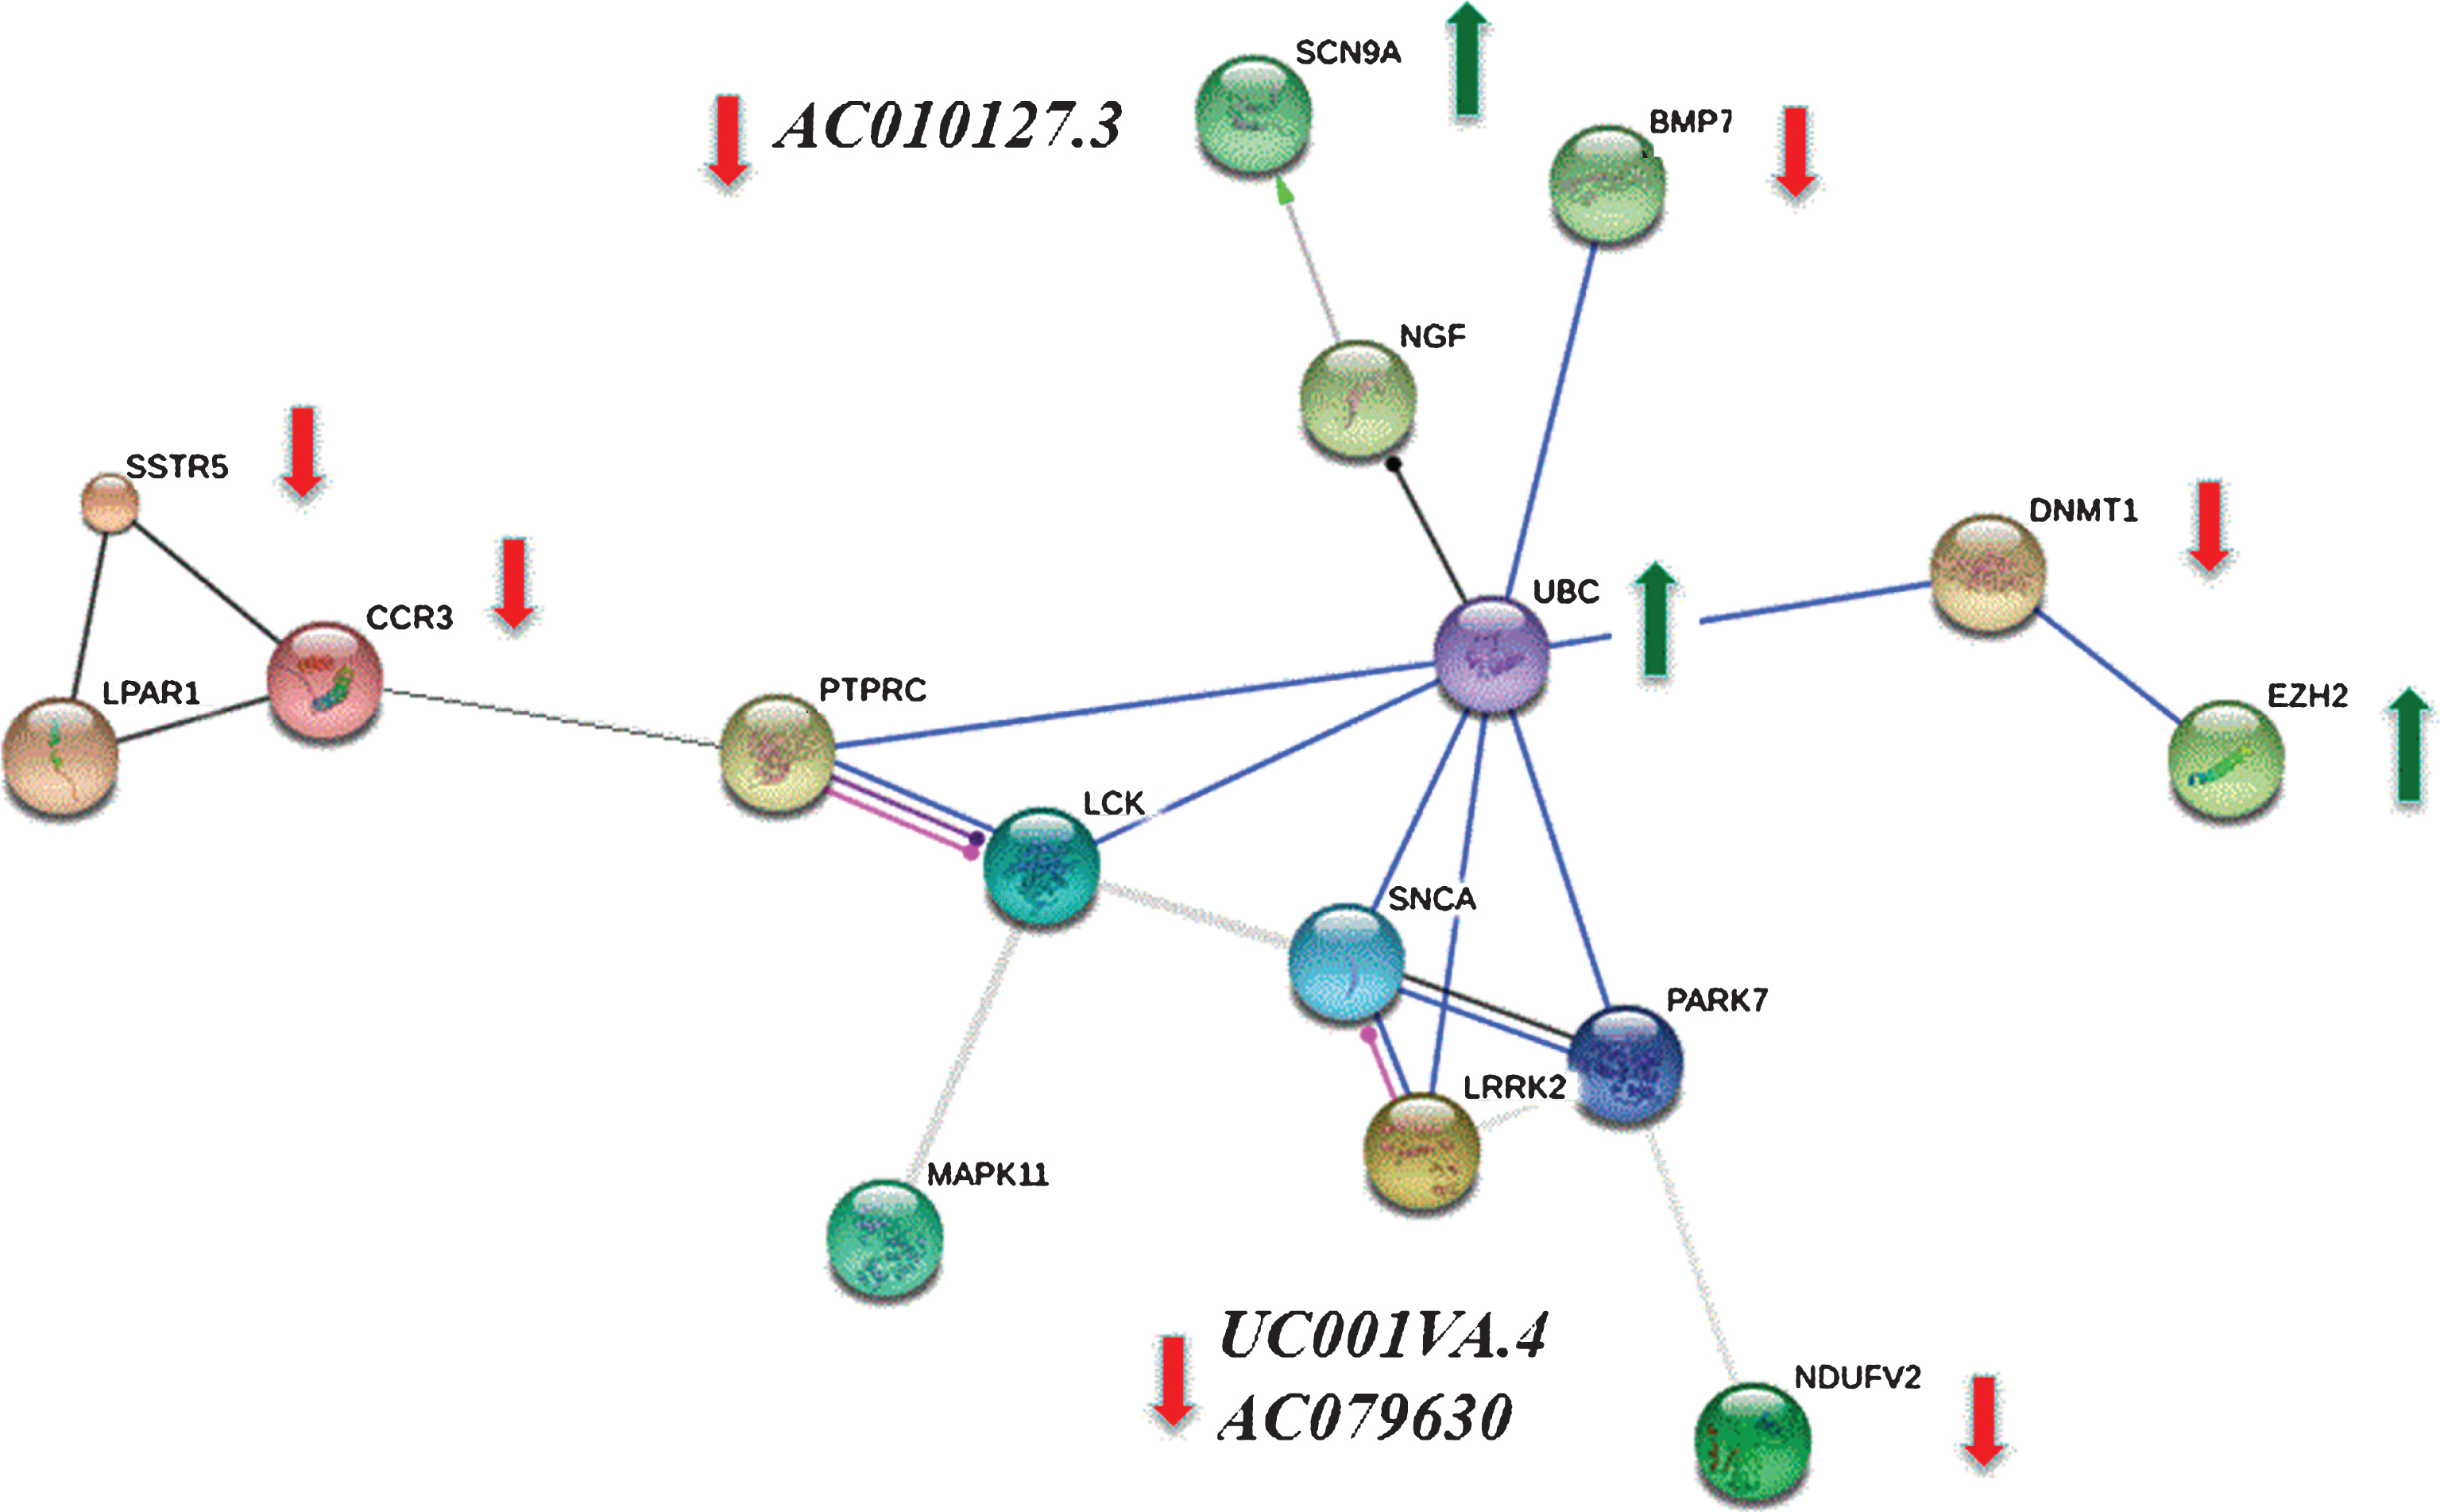 Protein-protein interaction (PPI) network was constructed from differentially expressed genes (DEGs) validated by quantitative real-time PCR. We mapped 201 DEGs to the STRING database (the hub protein was selected according to the node degree) and screened significant interactions with a score >0.7. Because of the close relationship between DEGs and known PD genes PARK7, LRRK2 and SNCA, these genes were added to the module to form a more complete network. Green arrows indicate up-regulated and red bars indicate down-regulated genes between PD patients and controls that were validated by quantitative real time PCR. AC010127.3 is an antisense RNA to SCN9a and UC001lva.4 and AC079630 are two lncRNAs on the LRRK2 gene that are all significantly down-regulated in CSF samples of PD patients as compared to controls. There is no significant difference in the expression of the other genes as measured by qRT-PCR.